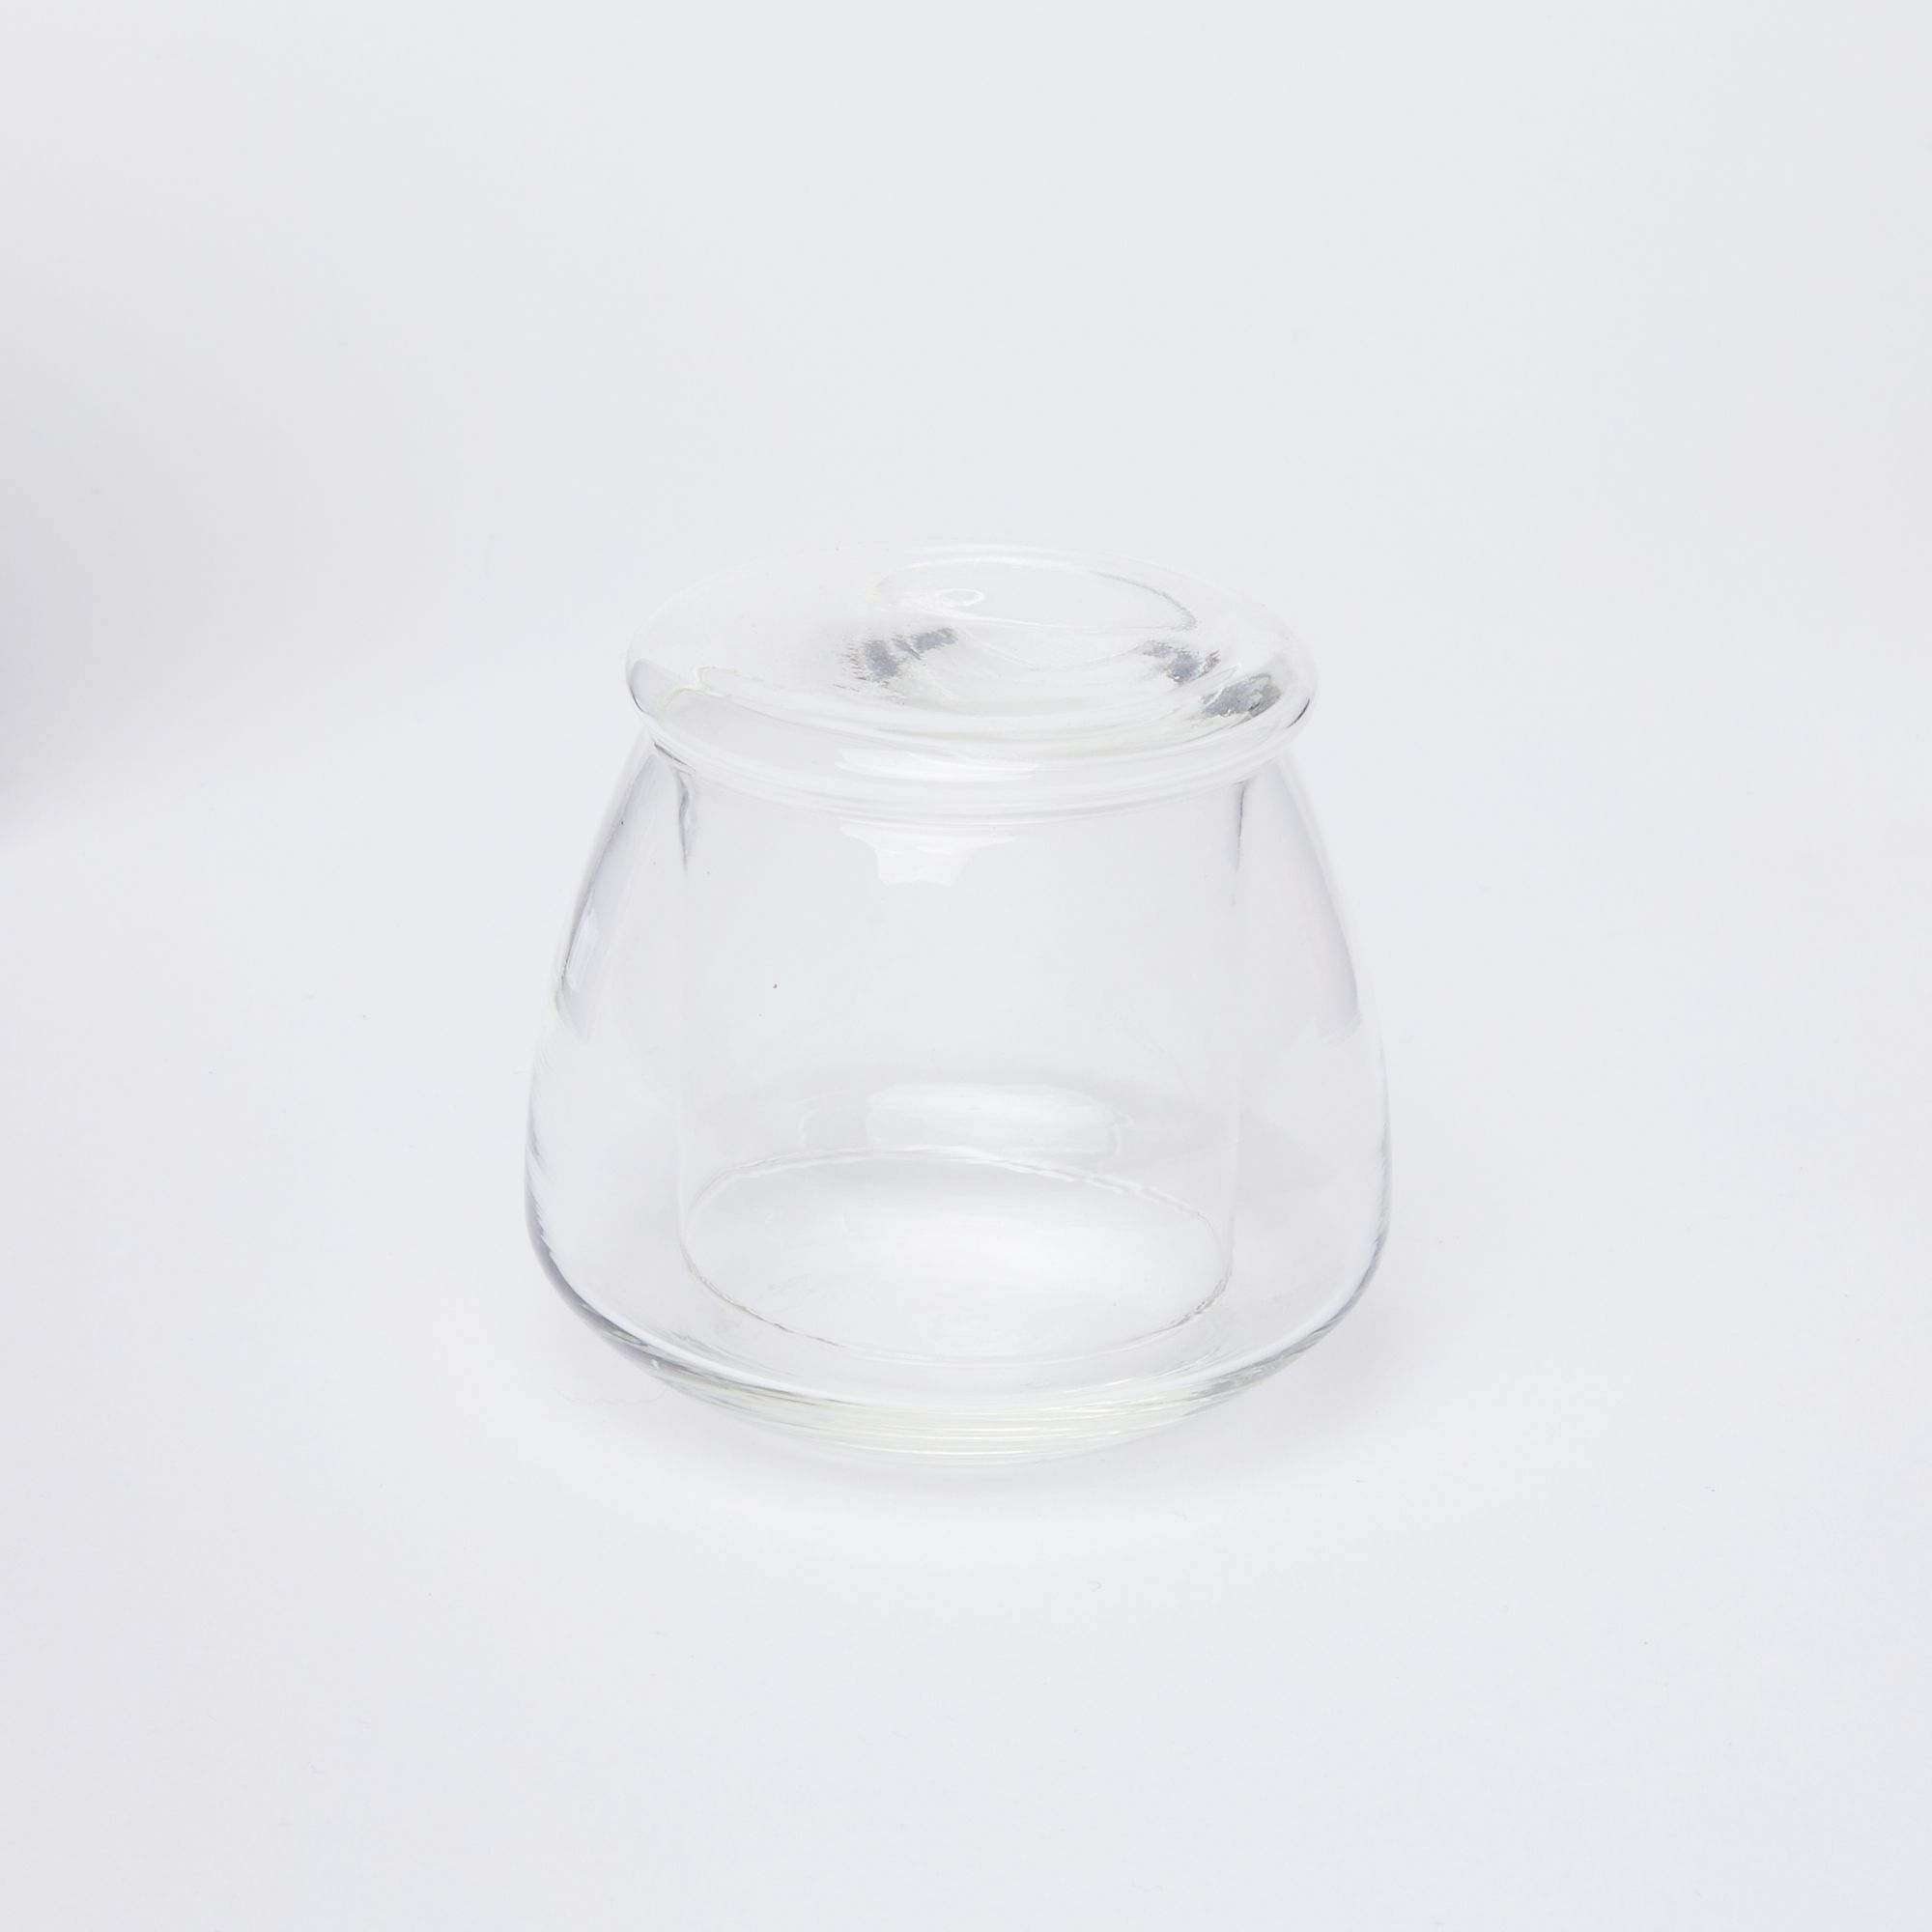 Clear glass butter keeper on white background